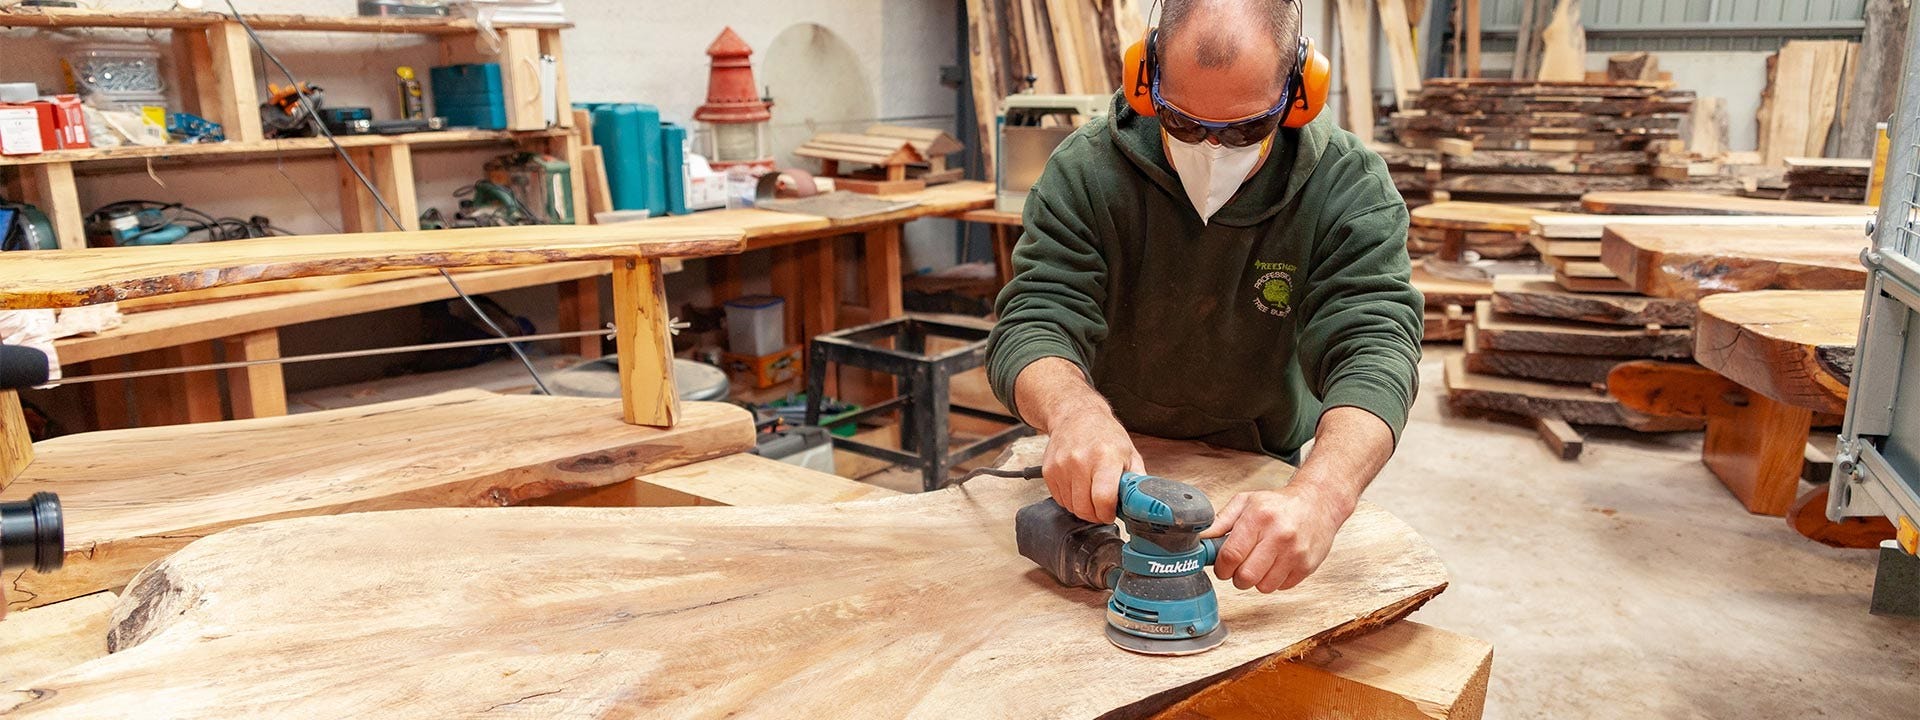 From Sawing Raw Logs To Moulding Finished Flooring – One Scotsman Can Do It All With Wood-mizer Equipment.